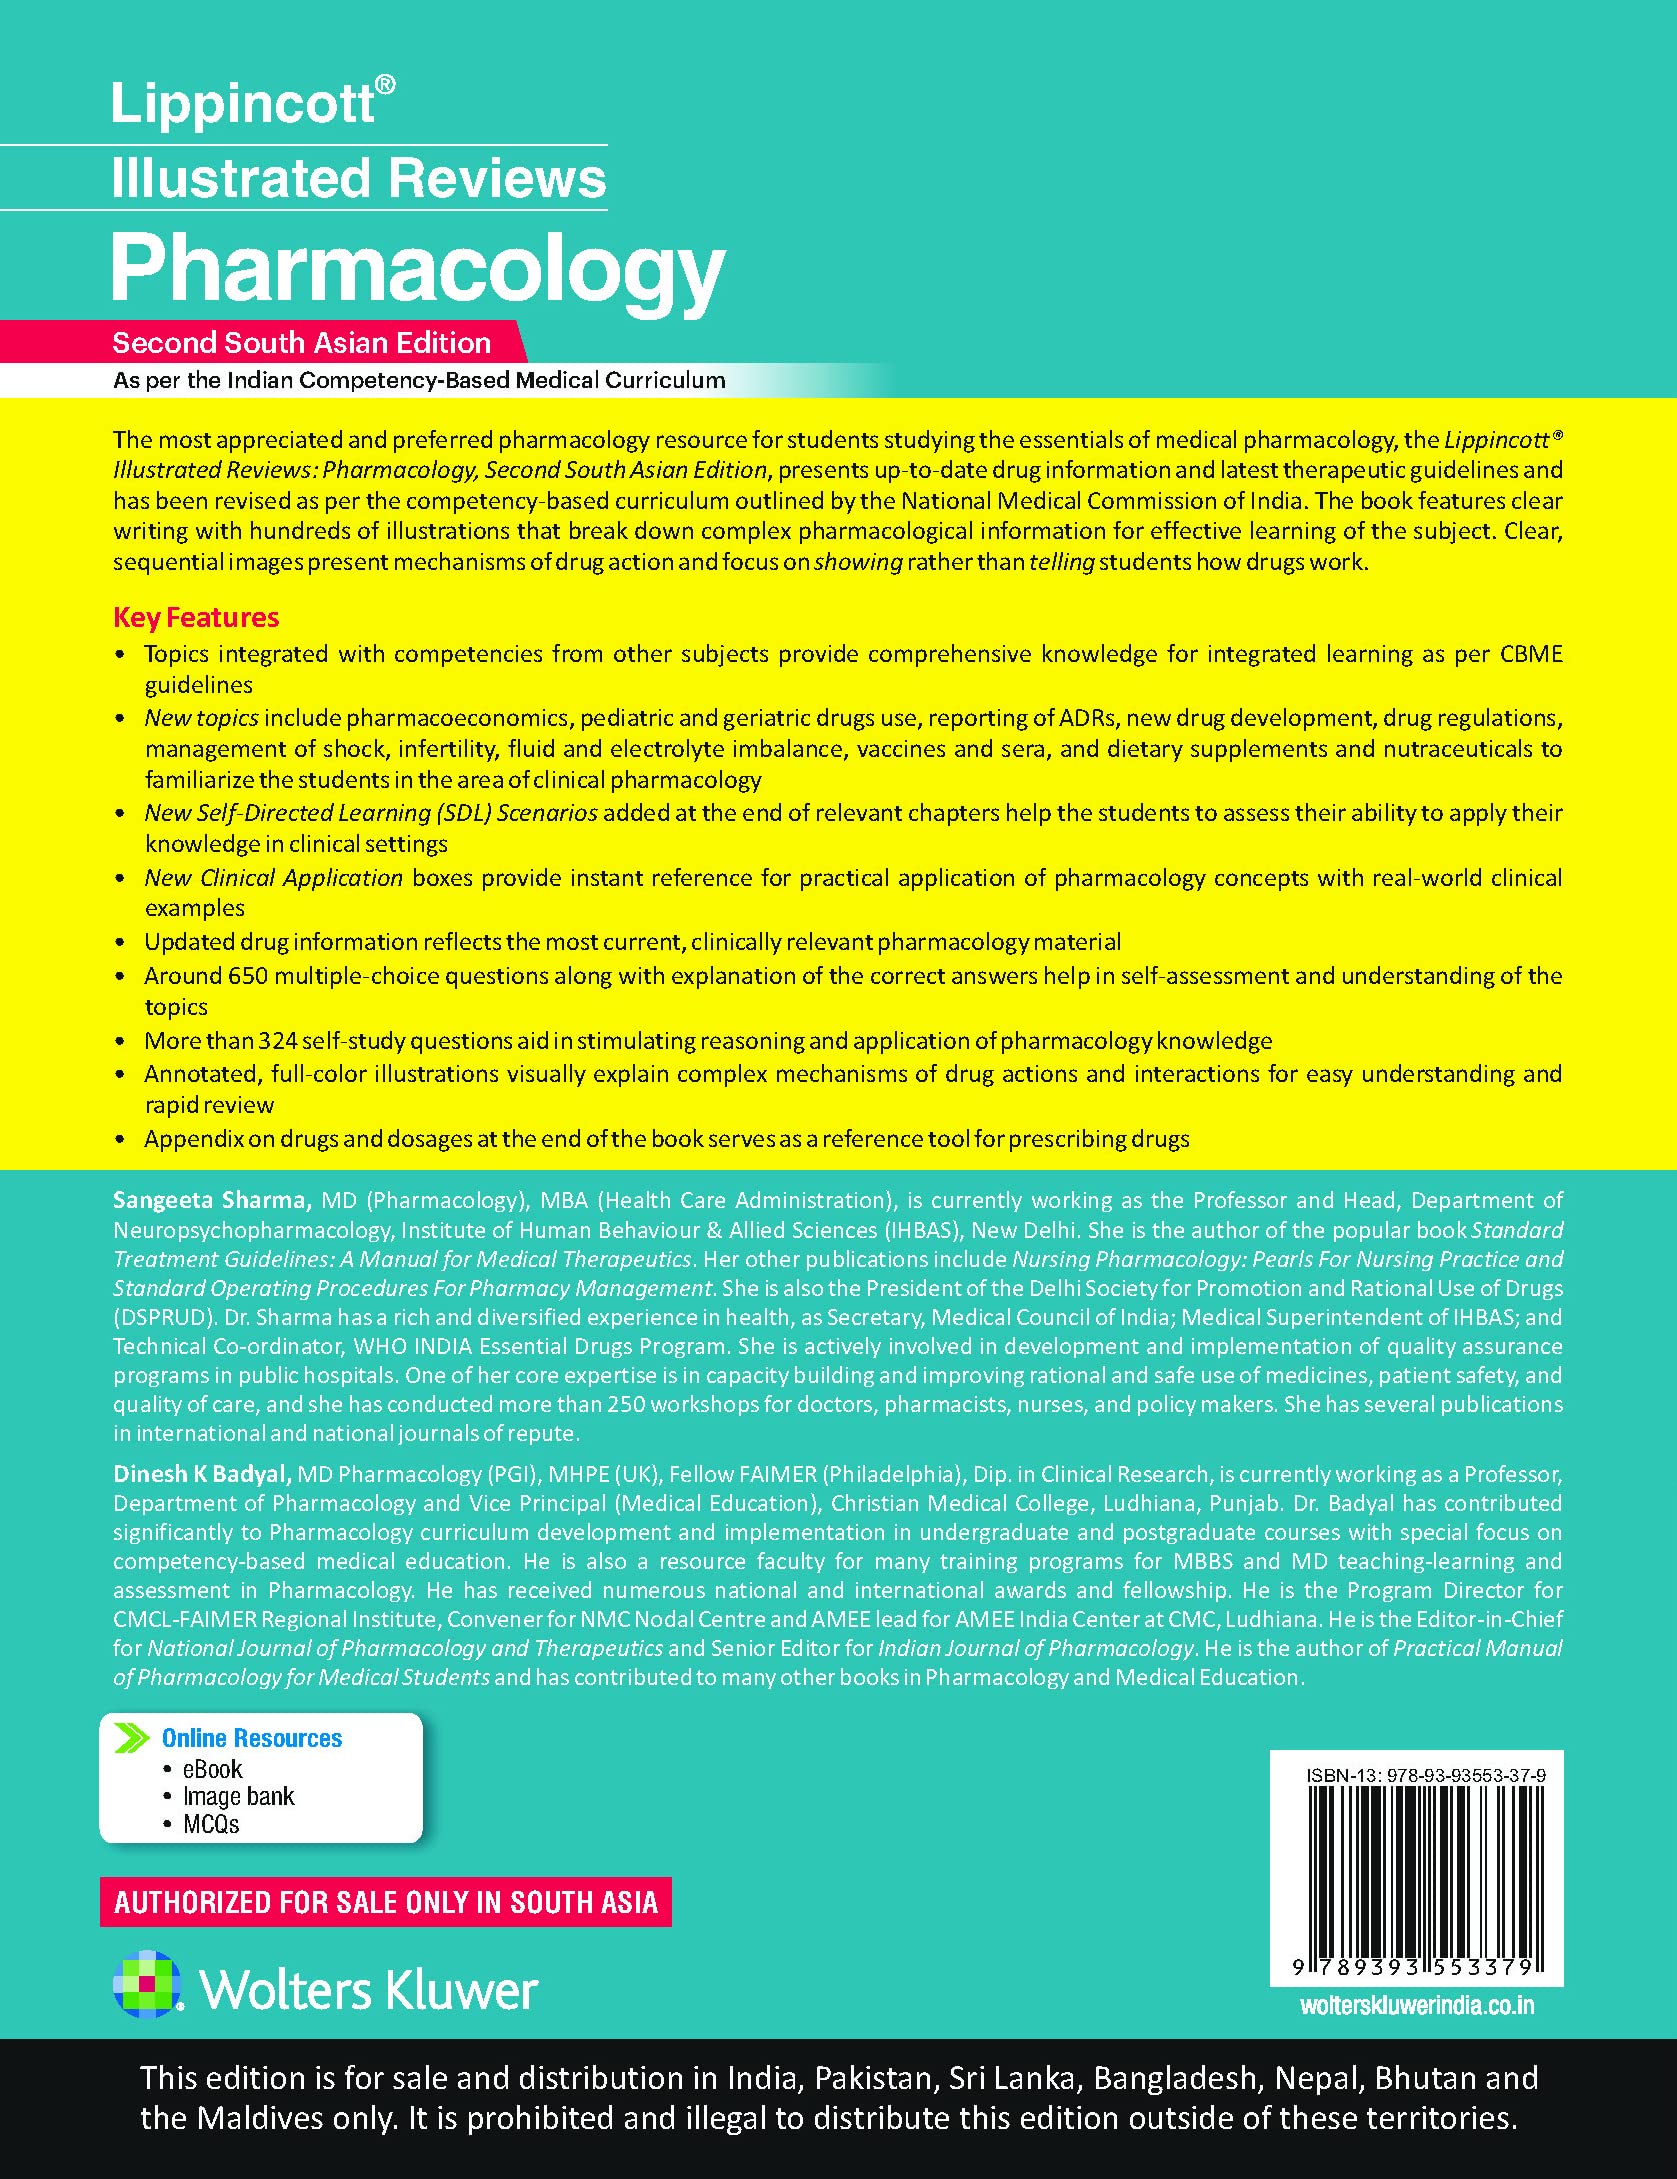 lippincott illustrated reviews: pharmacology 7th edition pdf free download